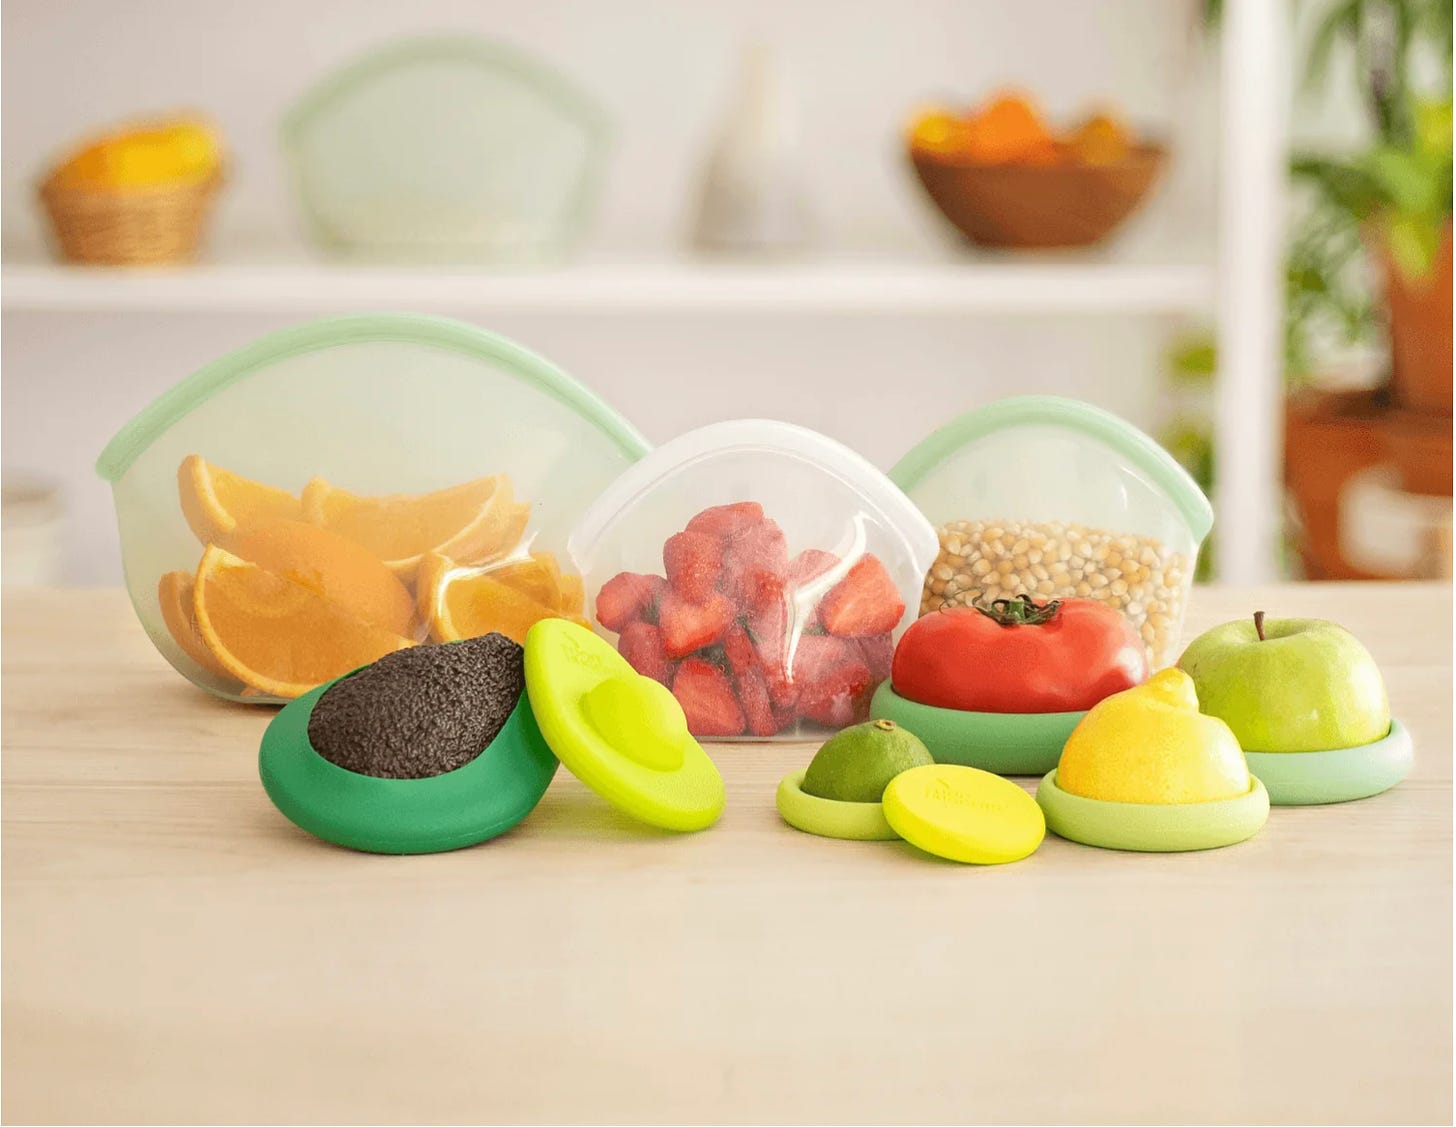 A photo of the "eco essentials" bundle, including silicon covers on a lemon, lime, apple, tomato, and avocado, and three resealable bags.